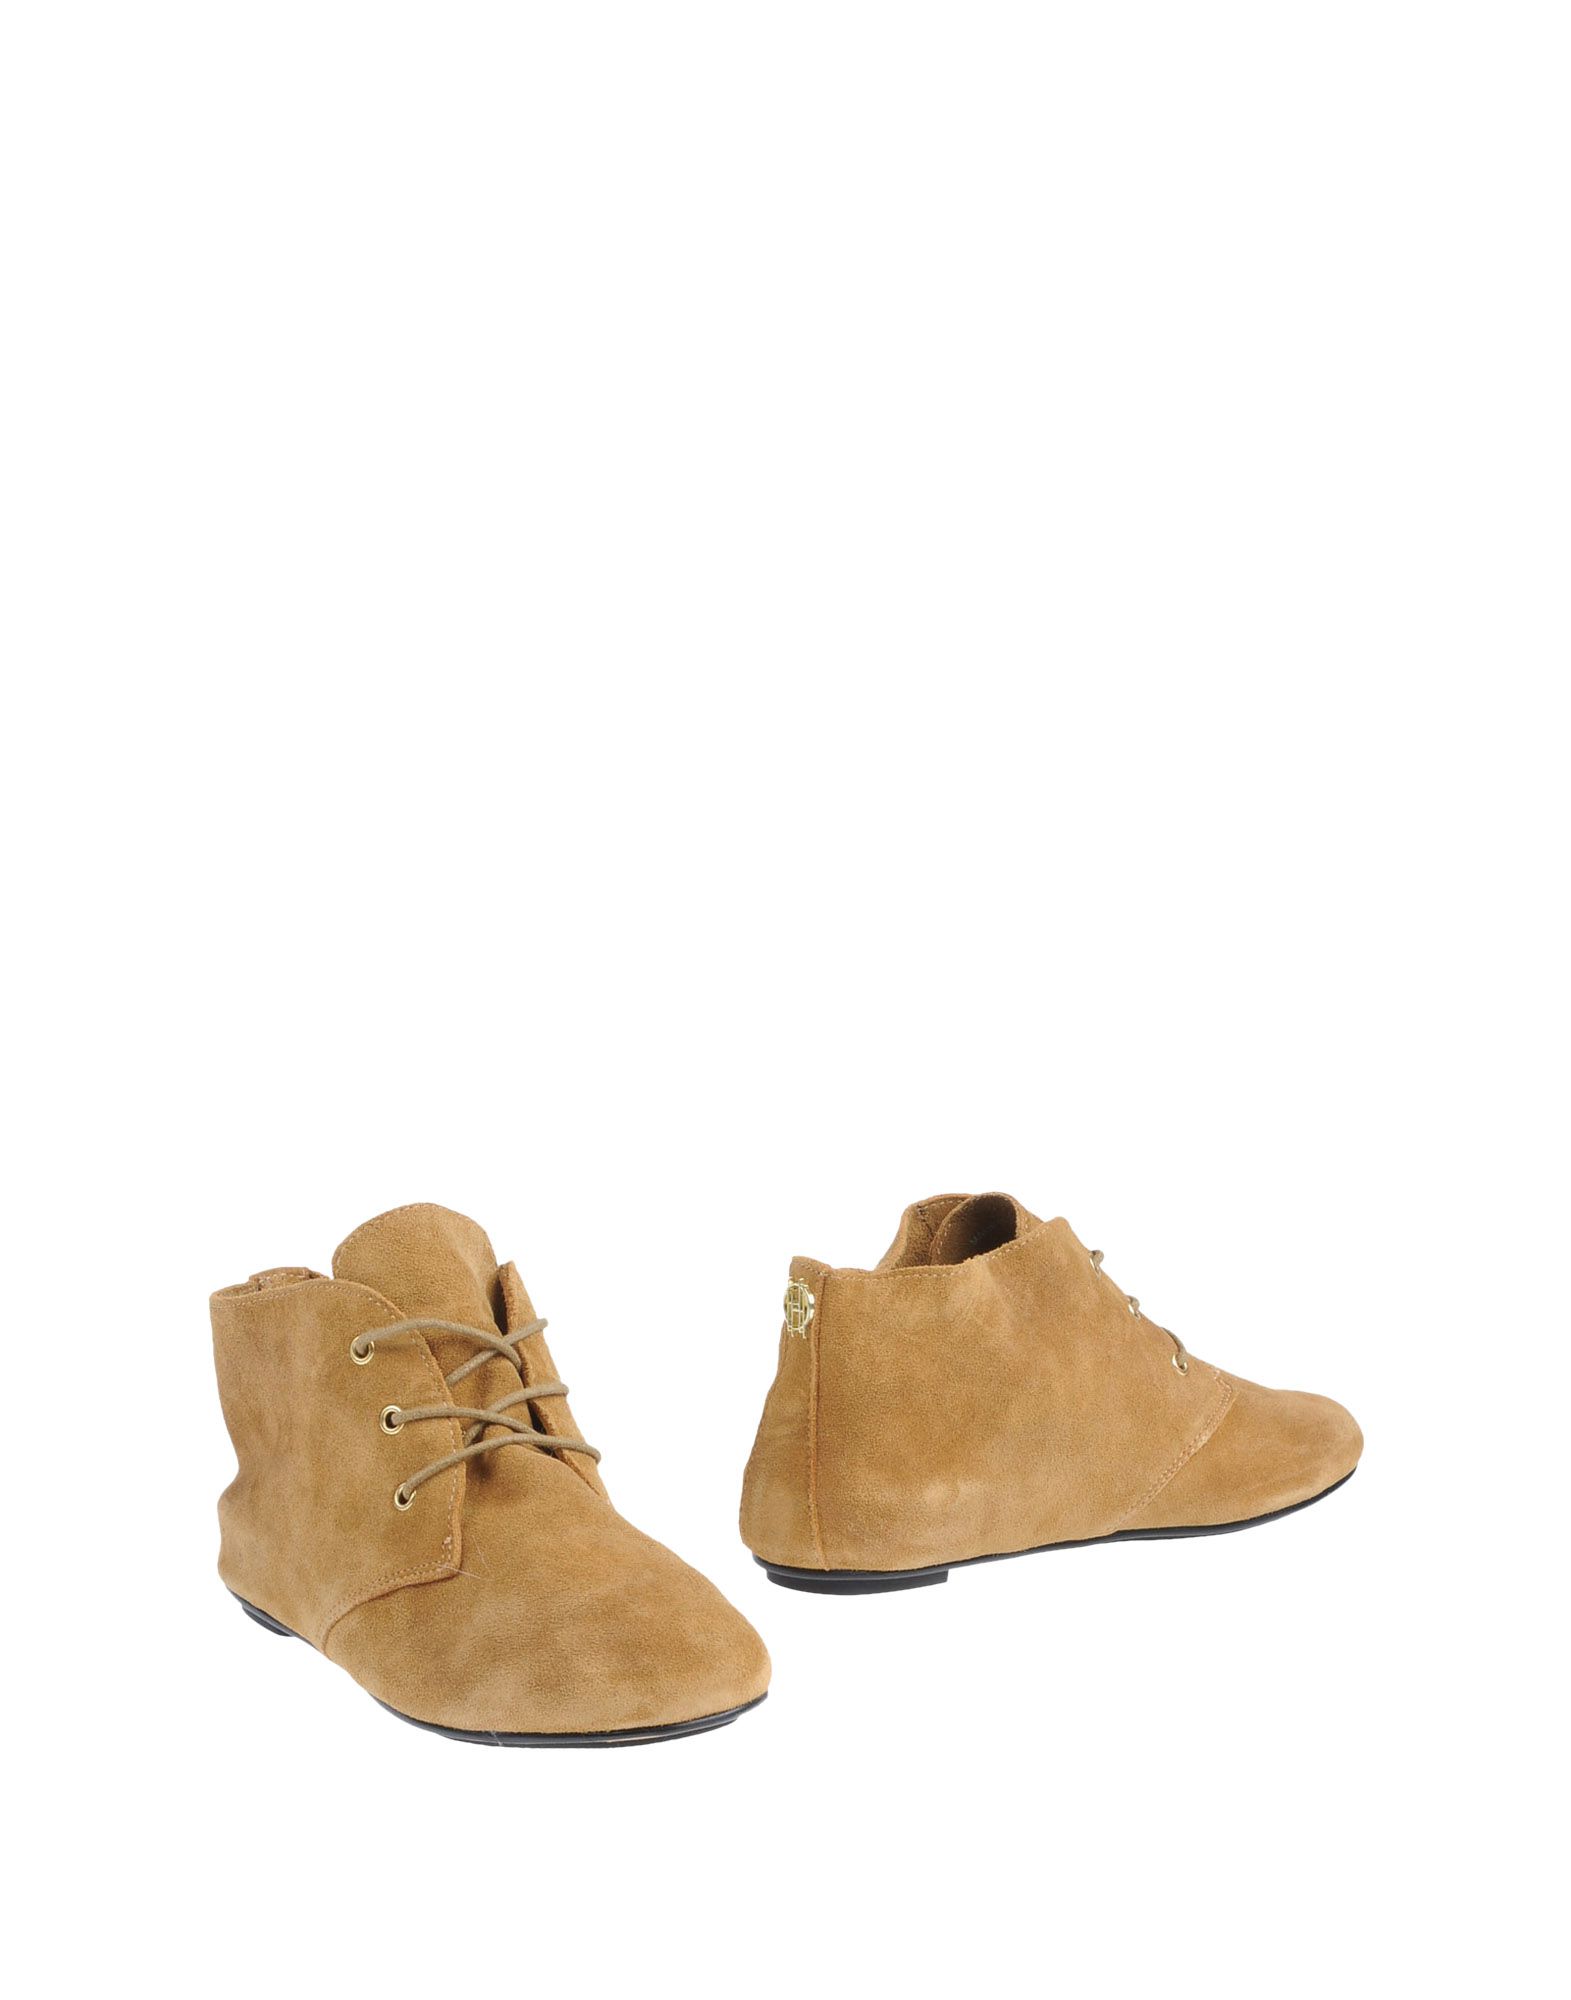 Foto House Of Harlow 1960 Botines Mujer Camel